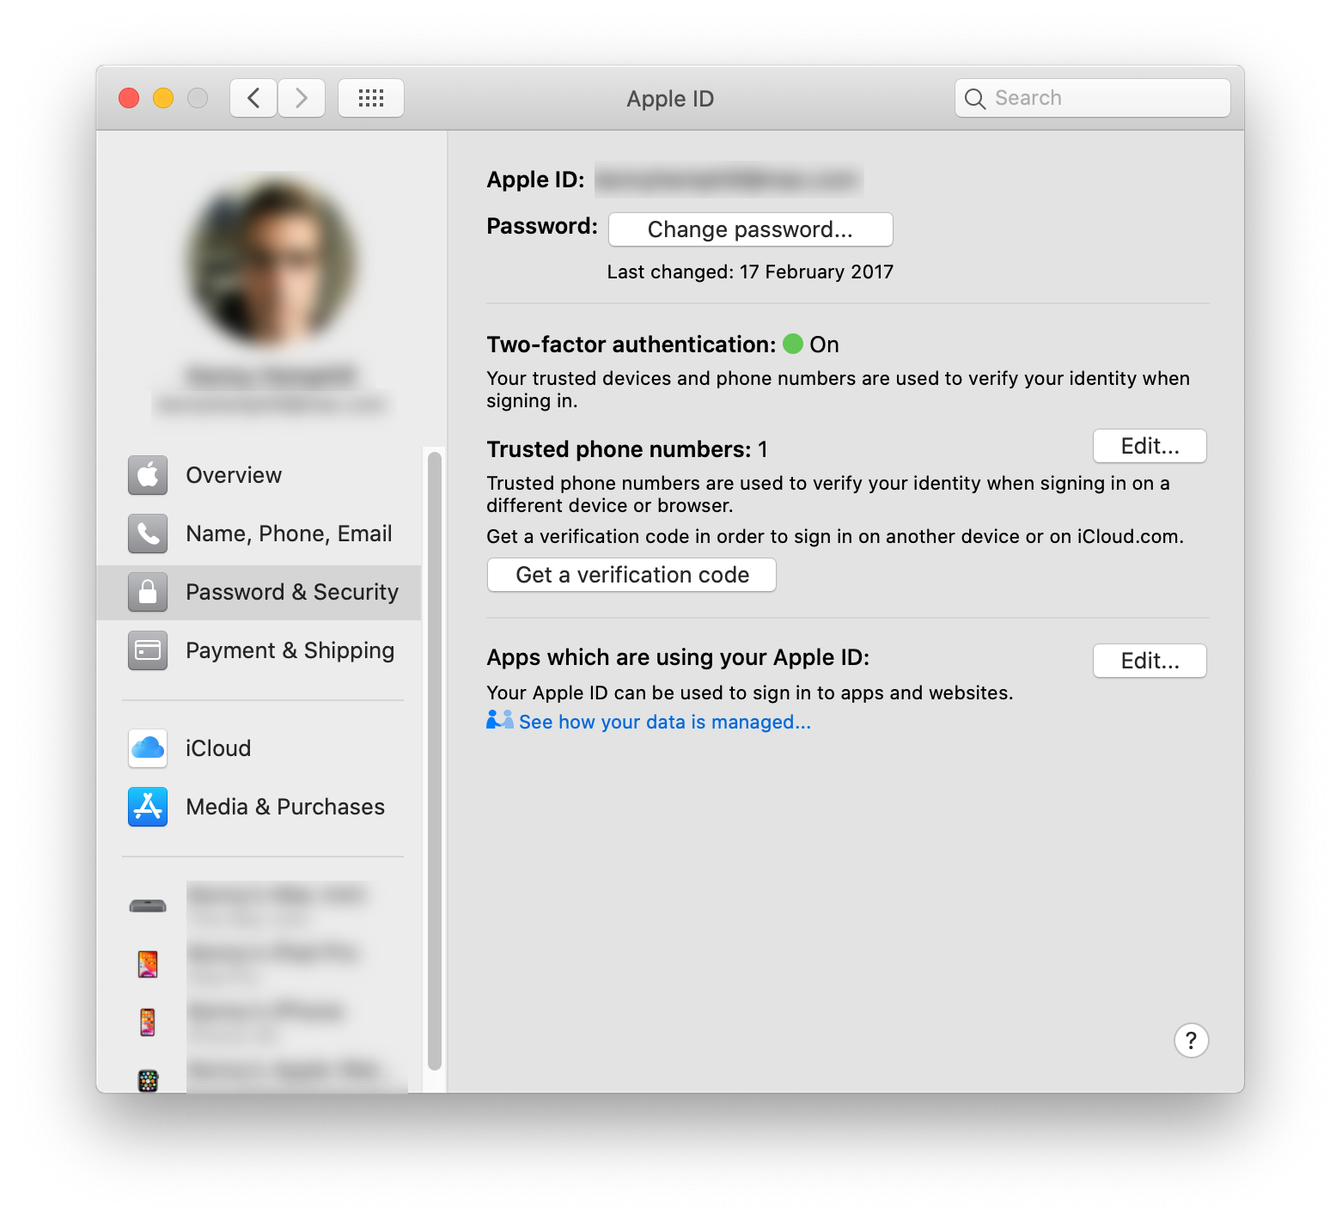 How to retain an Apple ID while switching your iCloud email address